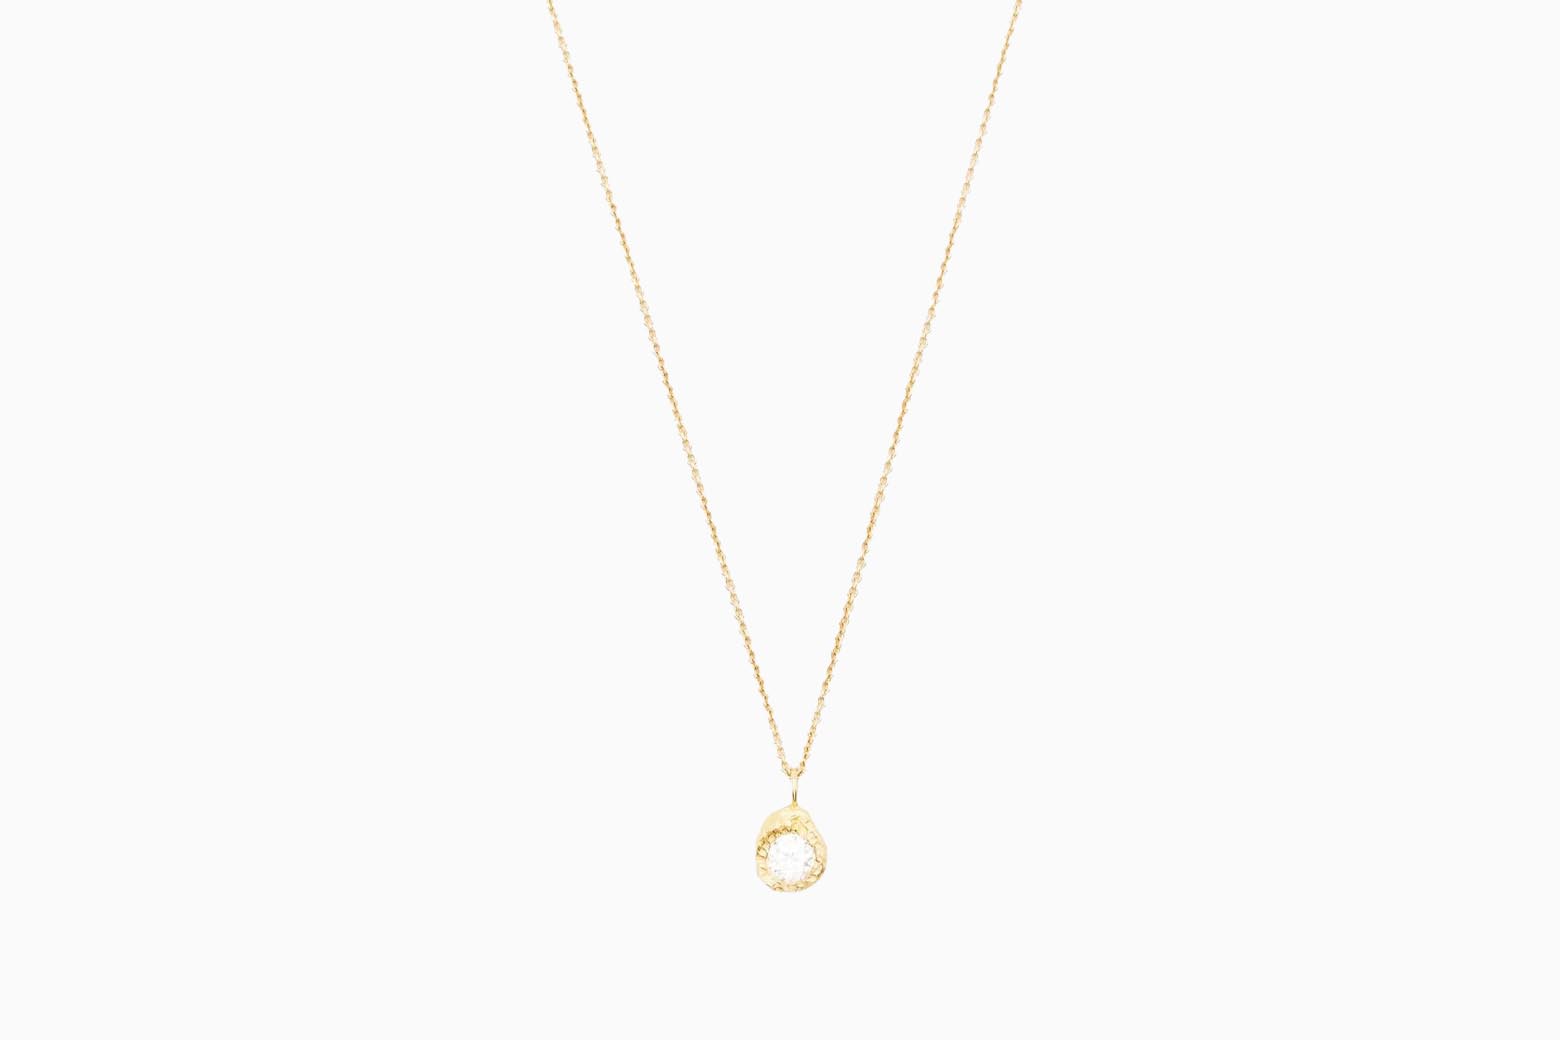 Best Necklaces For Her: Designer Necklaces To Wear Every Day